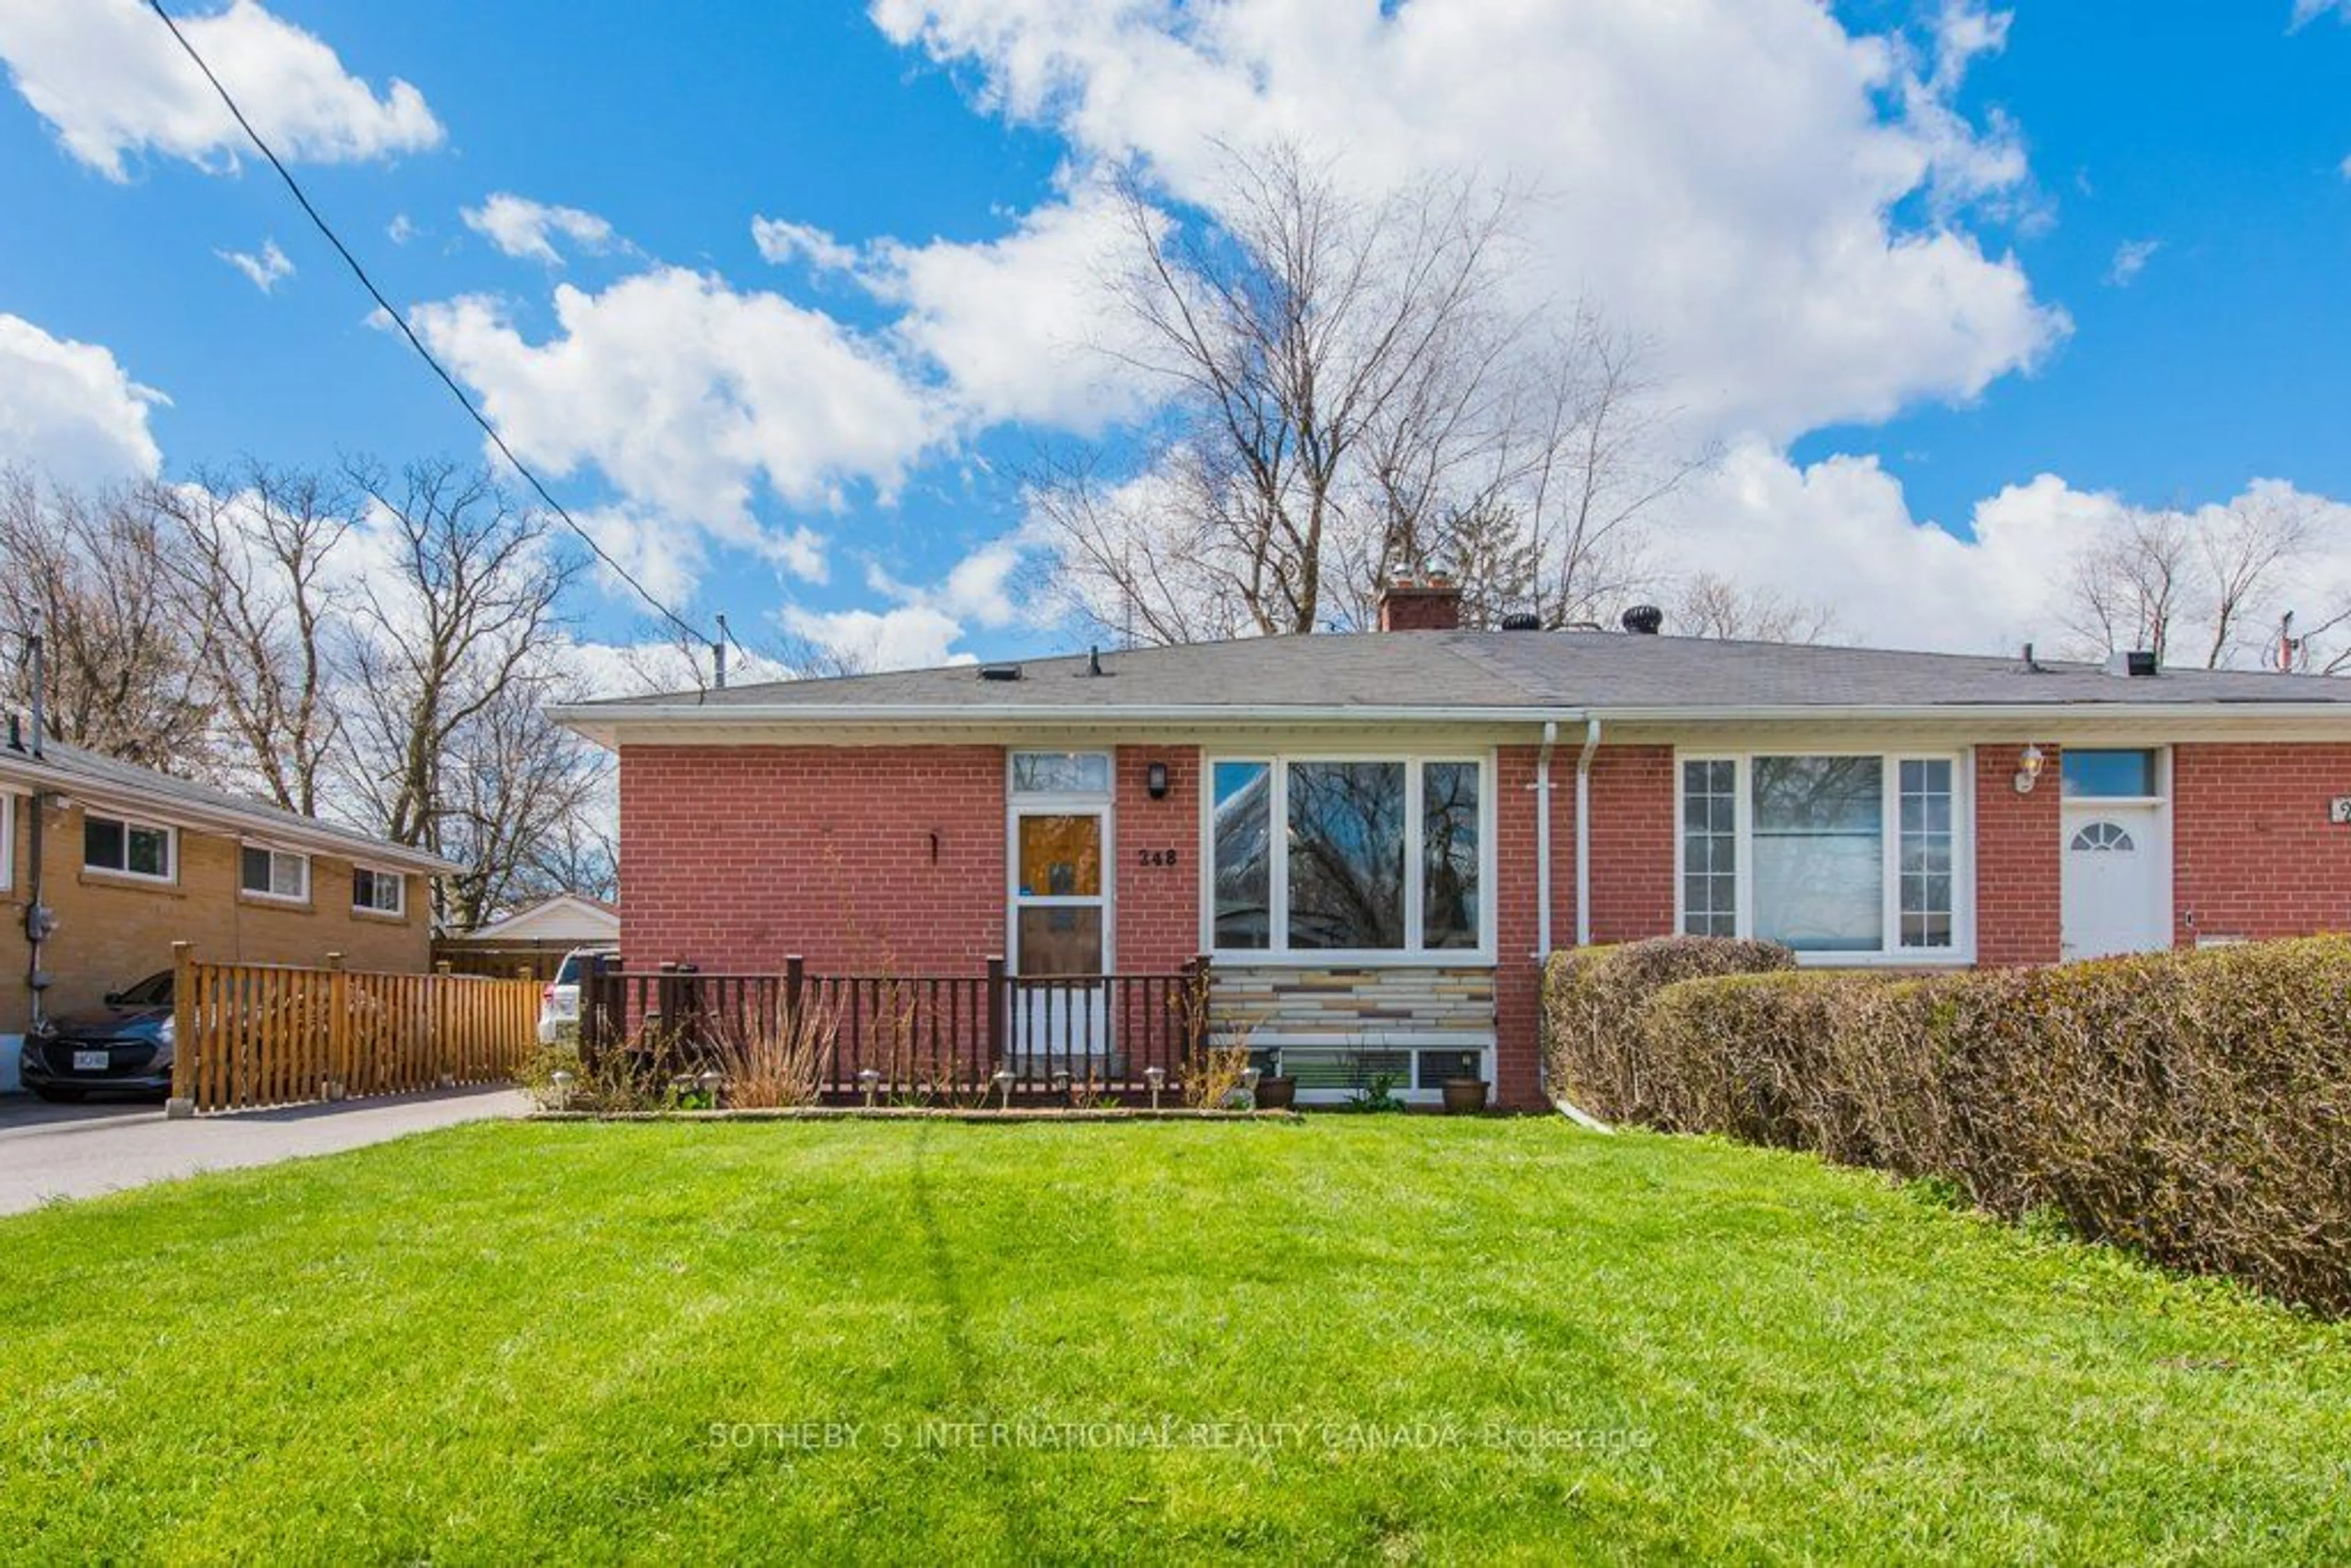 Frontside or backside of a home for 248 Axminster Dr, Richmond Hill Ontario L4C 2W1